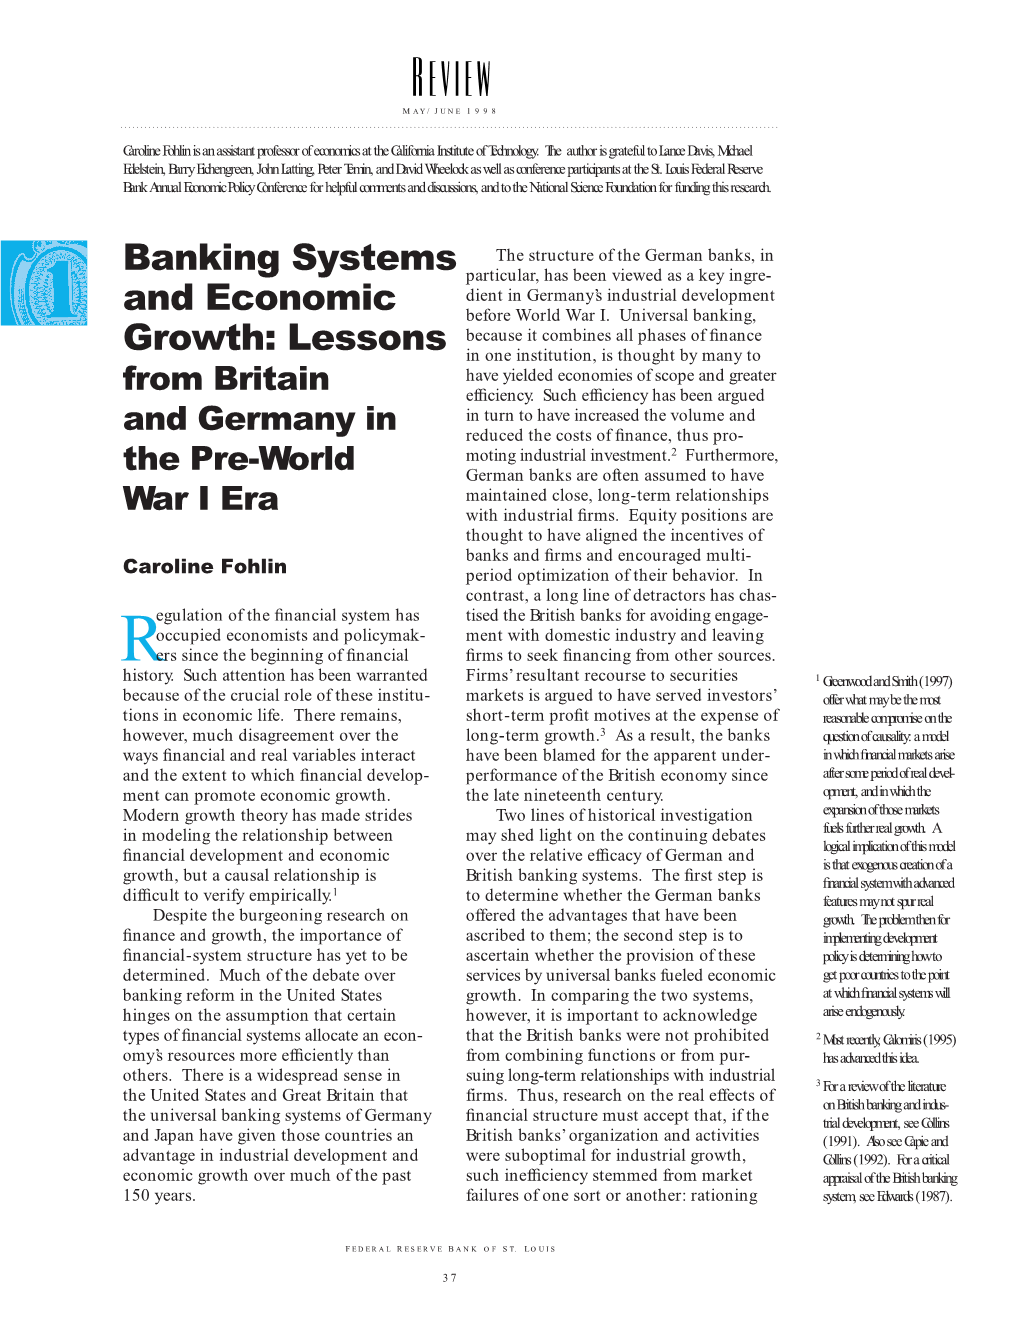 Banking Systems and Economic Growth